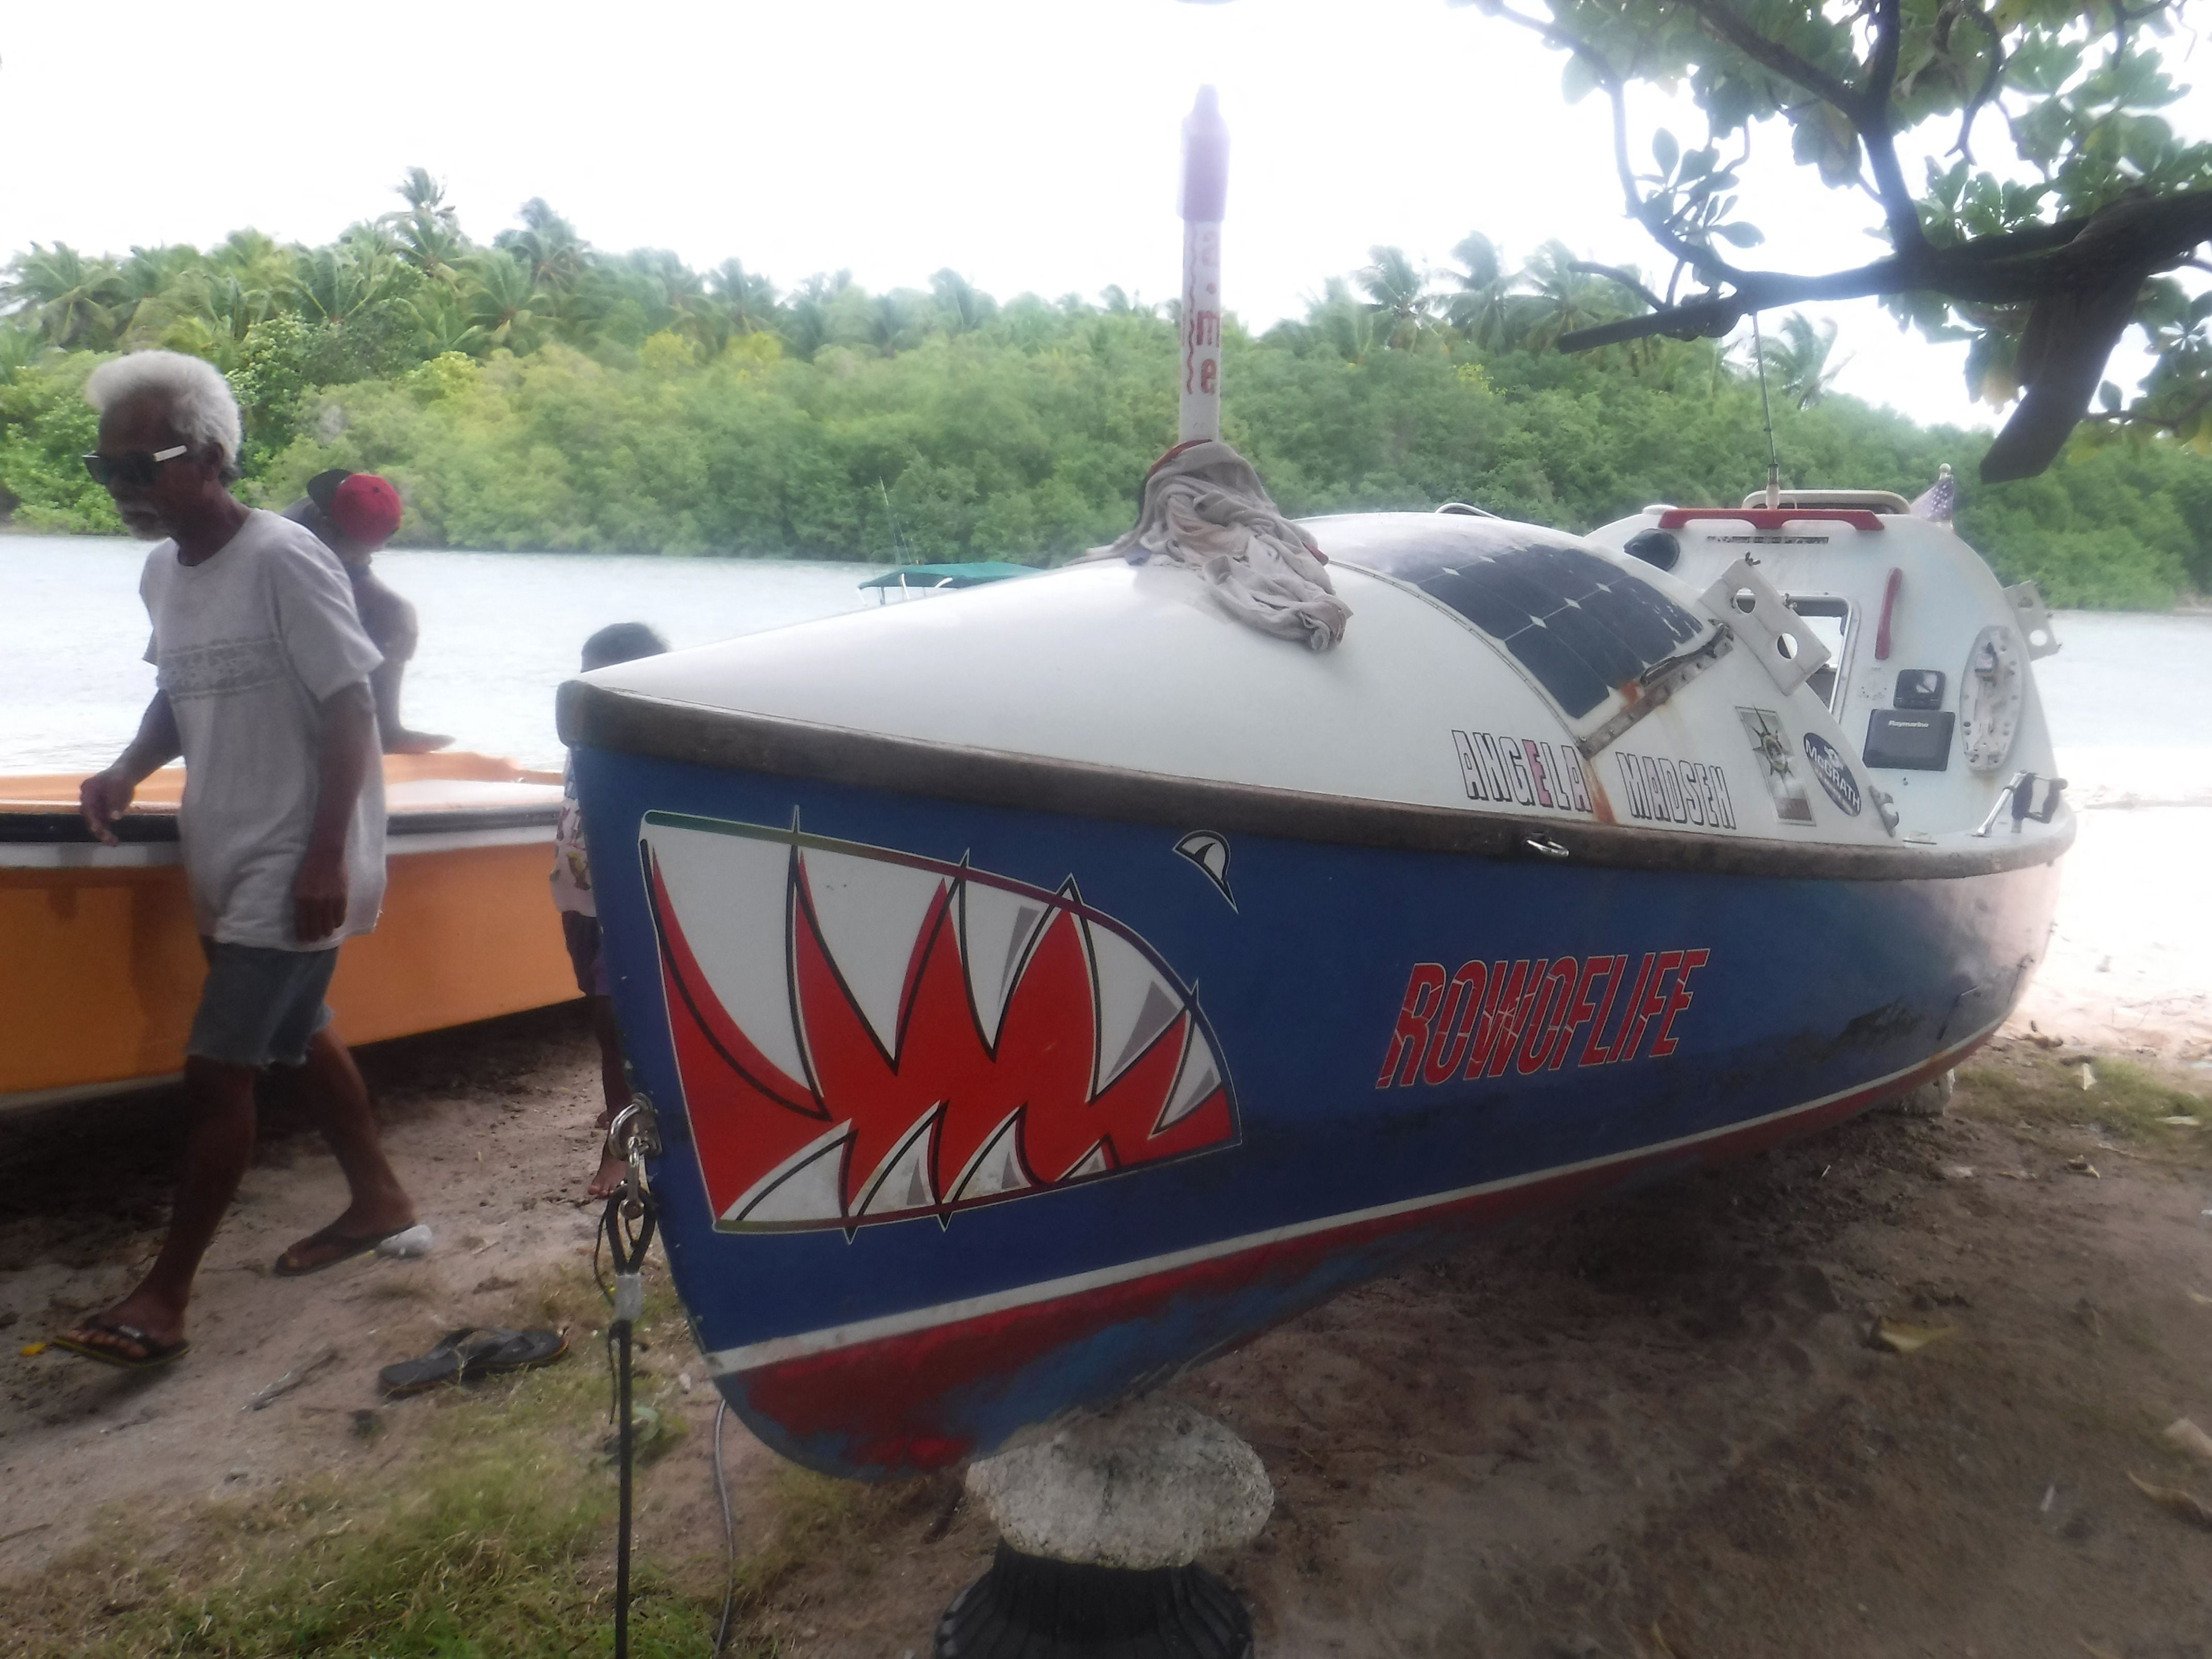 An undated handout photo received from Benjamin Chutaro on November 9, 2021 shows a boat used by the late US Paralympian and ocean rower Angela Madsen found washed up on Mili Island